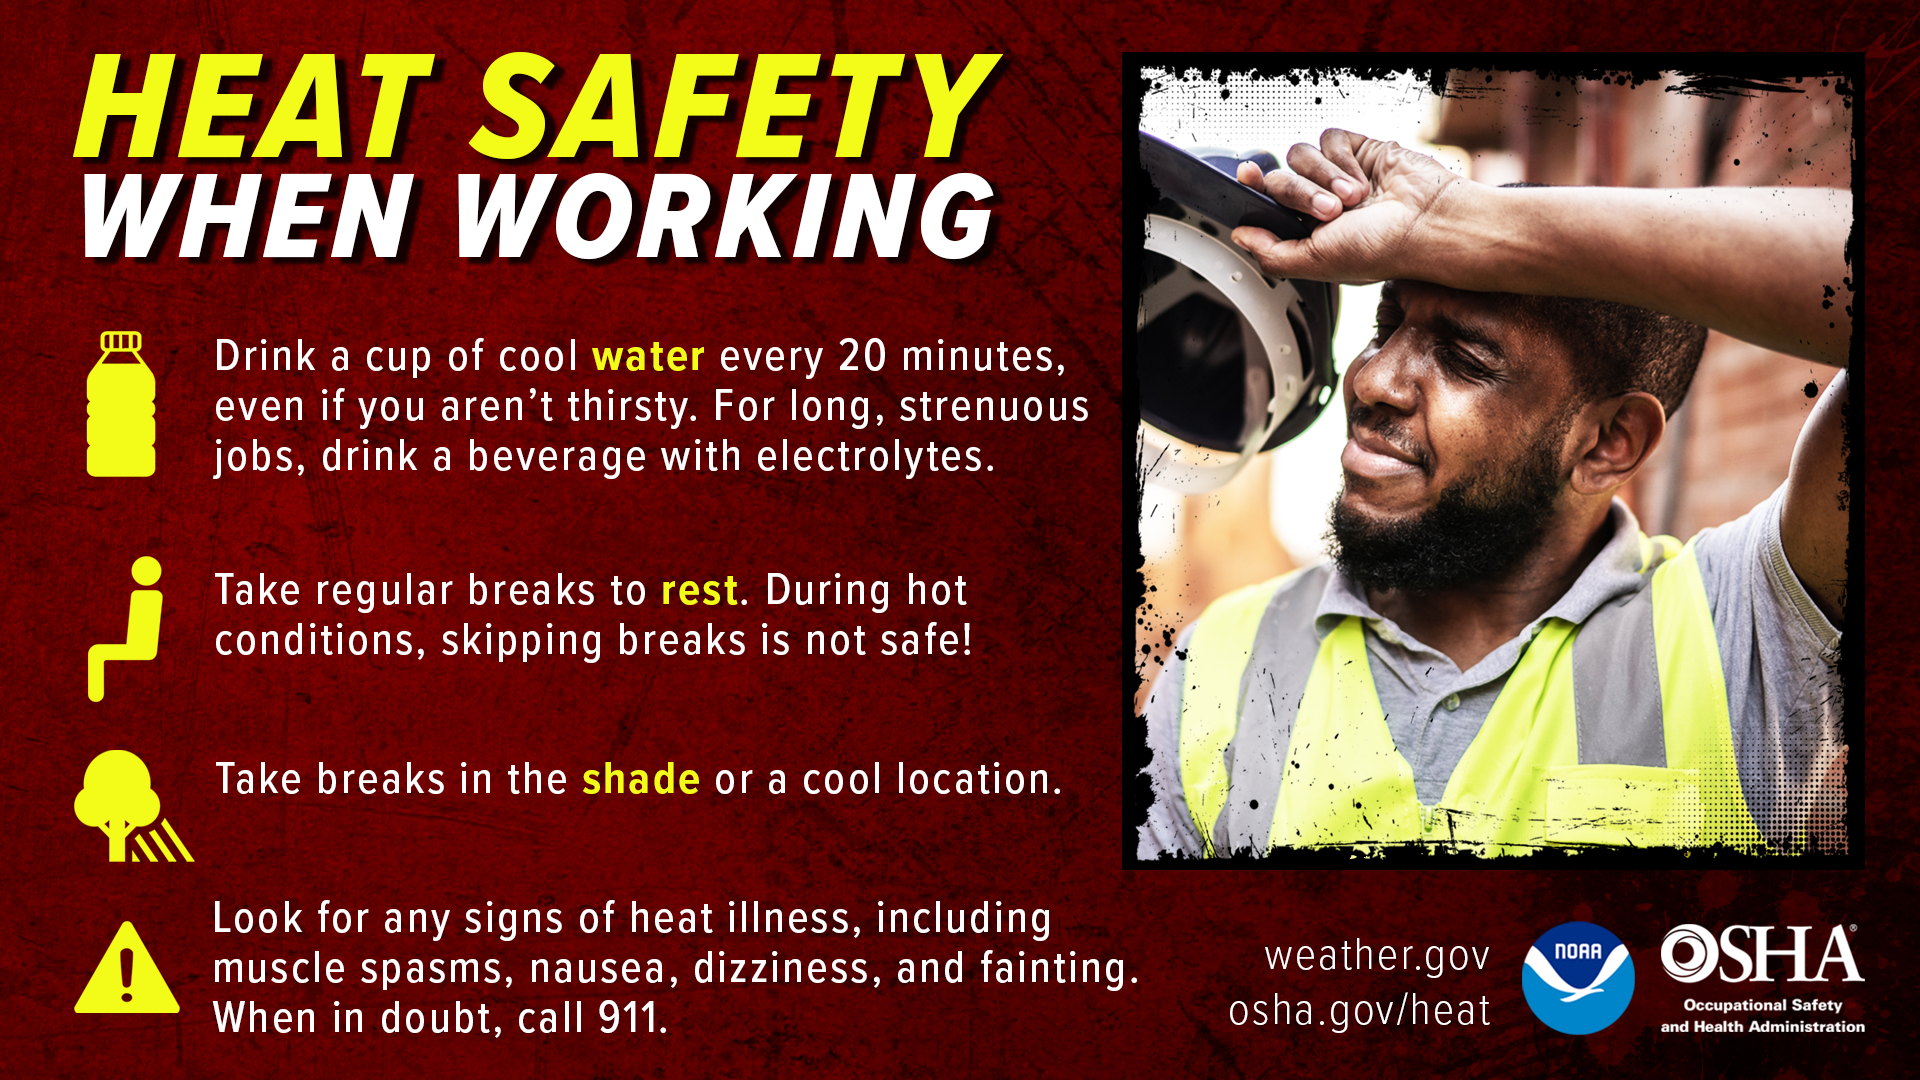 Heat Safety When Working: Drink a cup of cool water every 20 minutes, even if you aren't thirsty. For long jobs, drink a beverage with electrolytes. Take regular breaks to rest. During hot conditions, skipping breaks is not safe! Seek periodic breaks in the AC if possible. Spend time in the shade when outdoors.